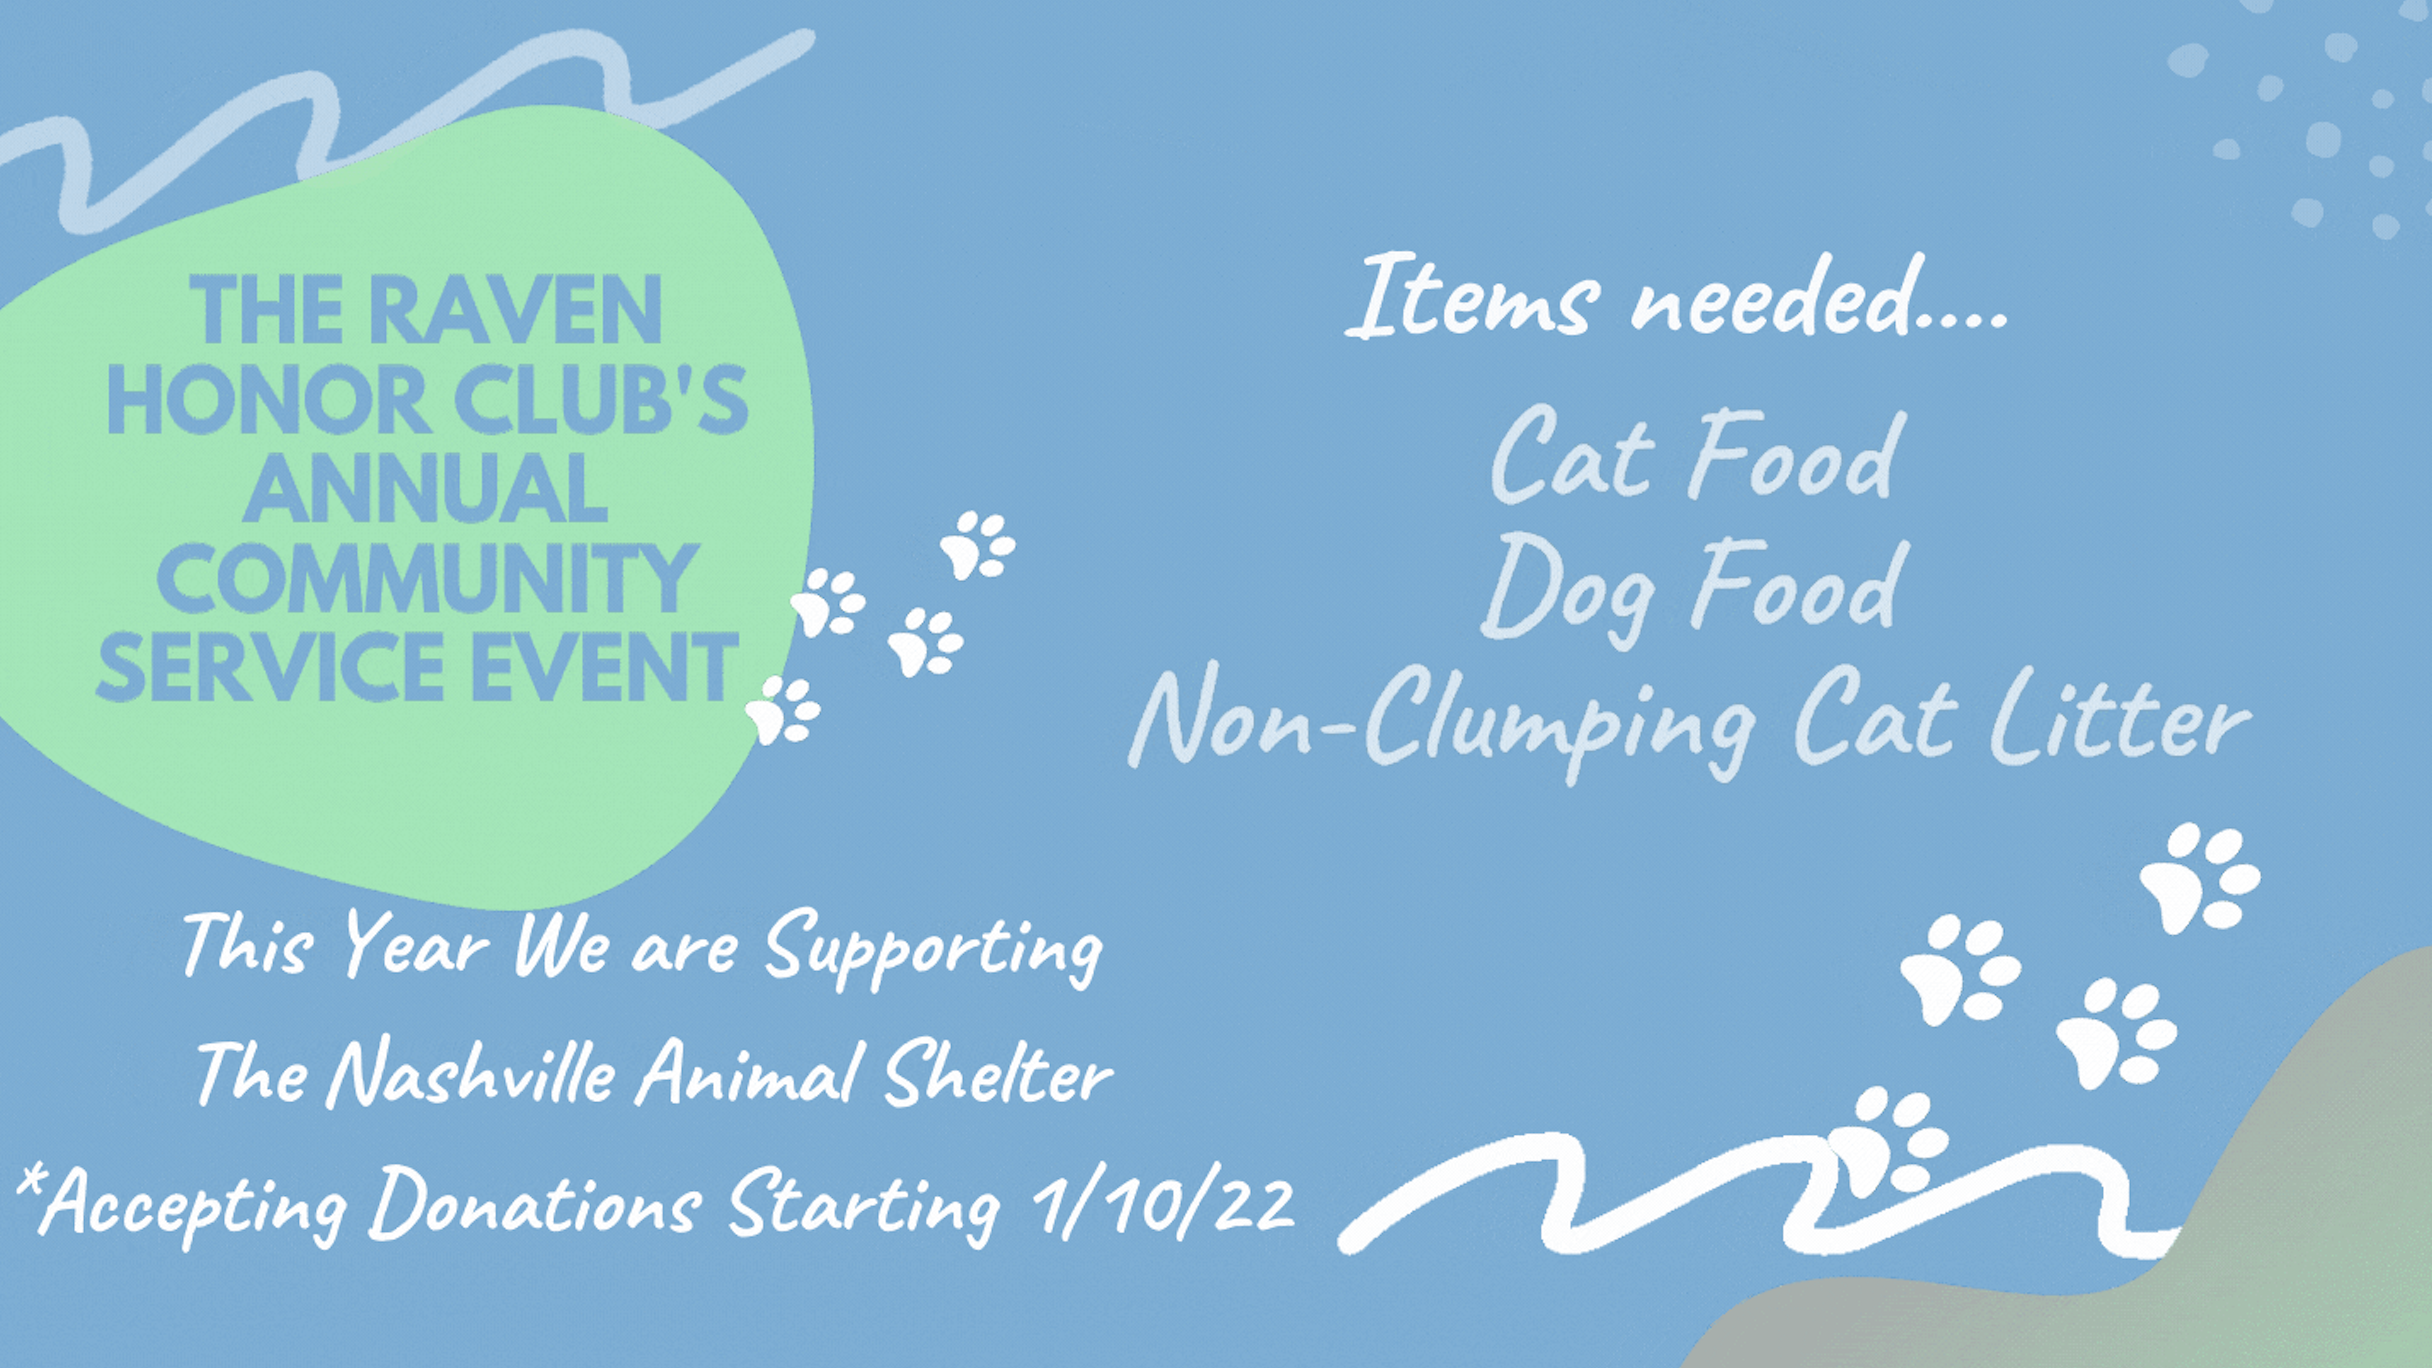 THE RAVEN HONOR CLUB'S ANNUAL COMMUNITY SERVICE EVENT Items needed... Cat Food Dog Food Non-Clumping Cat litter This Year We are Supporting The Nashville Animal Shelter *Accepting Donations Starting 1/10/22